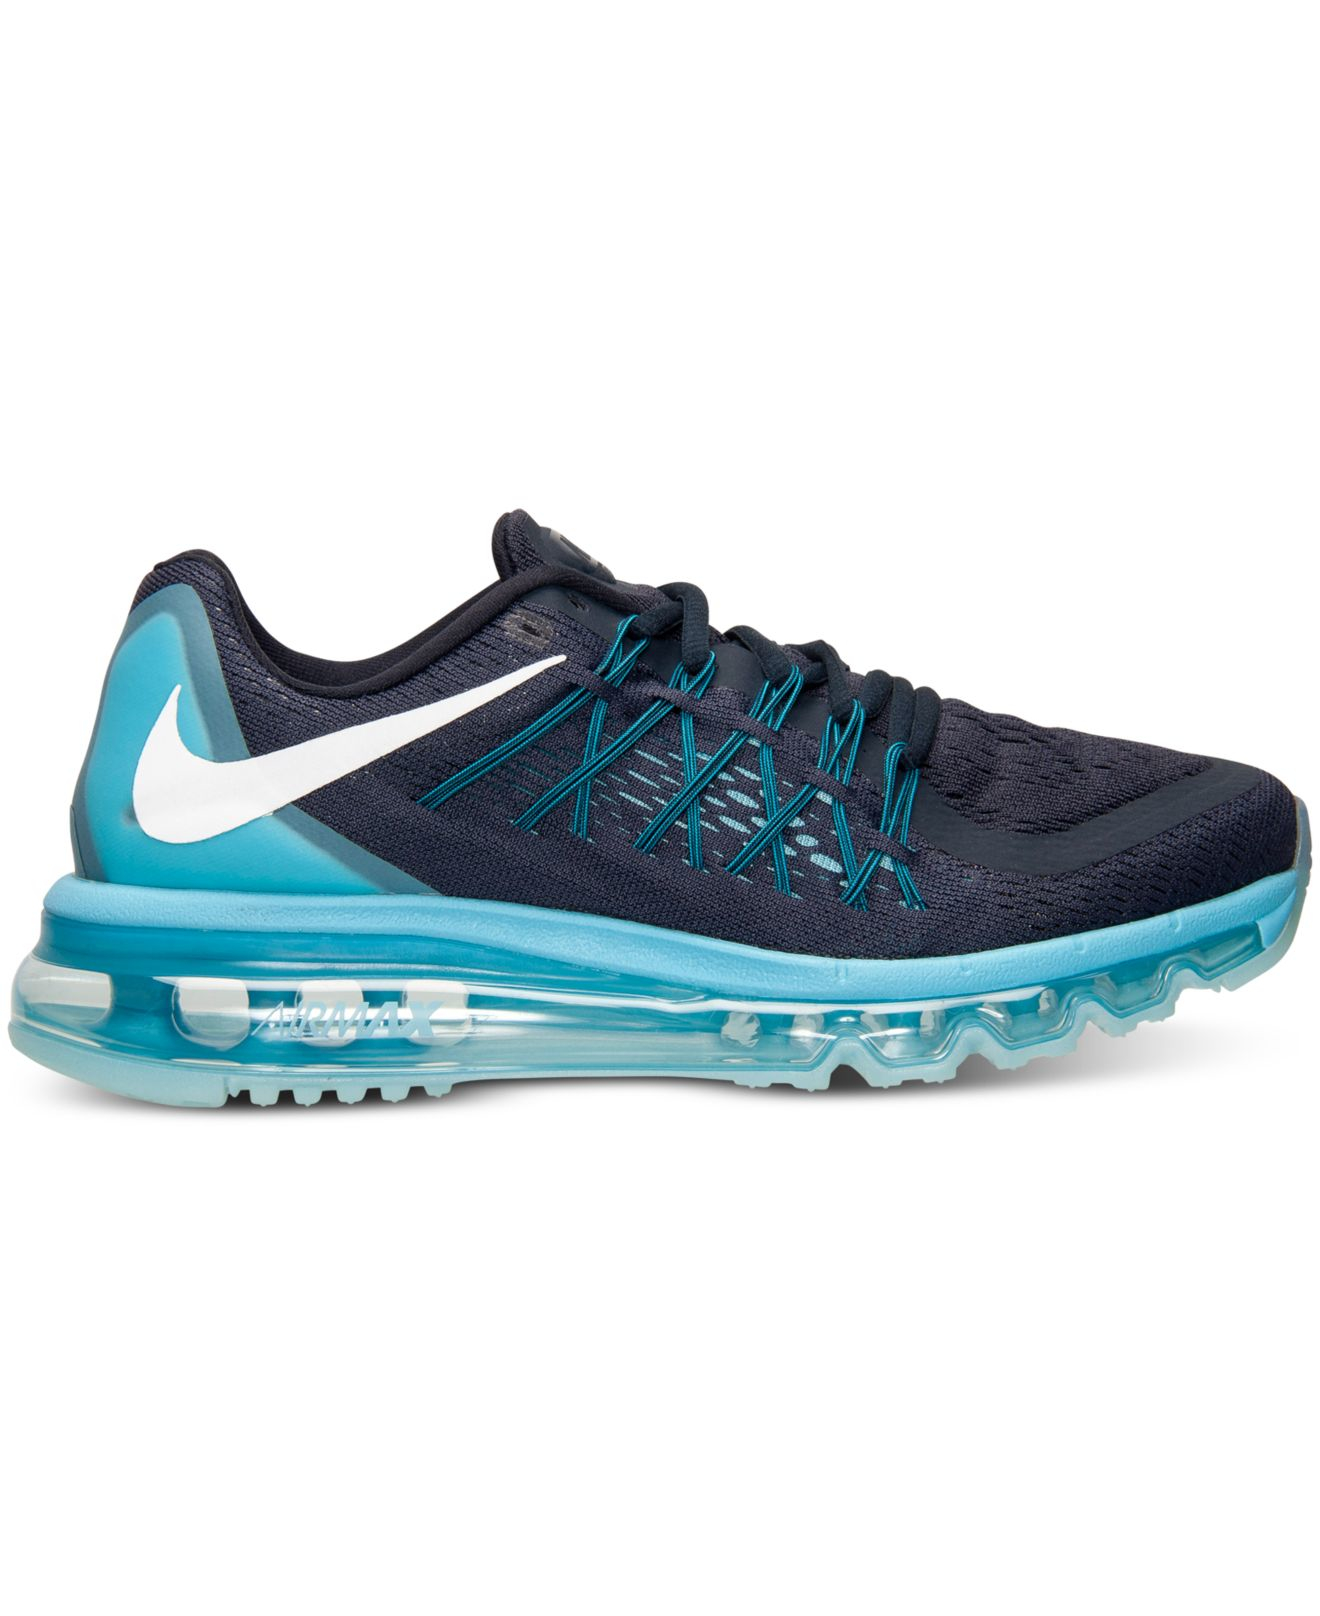 Lyst - Nike Women's Air Max 2015 Running Sneakers From Finish Line in Blue